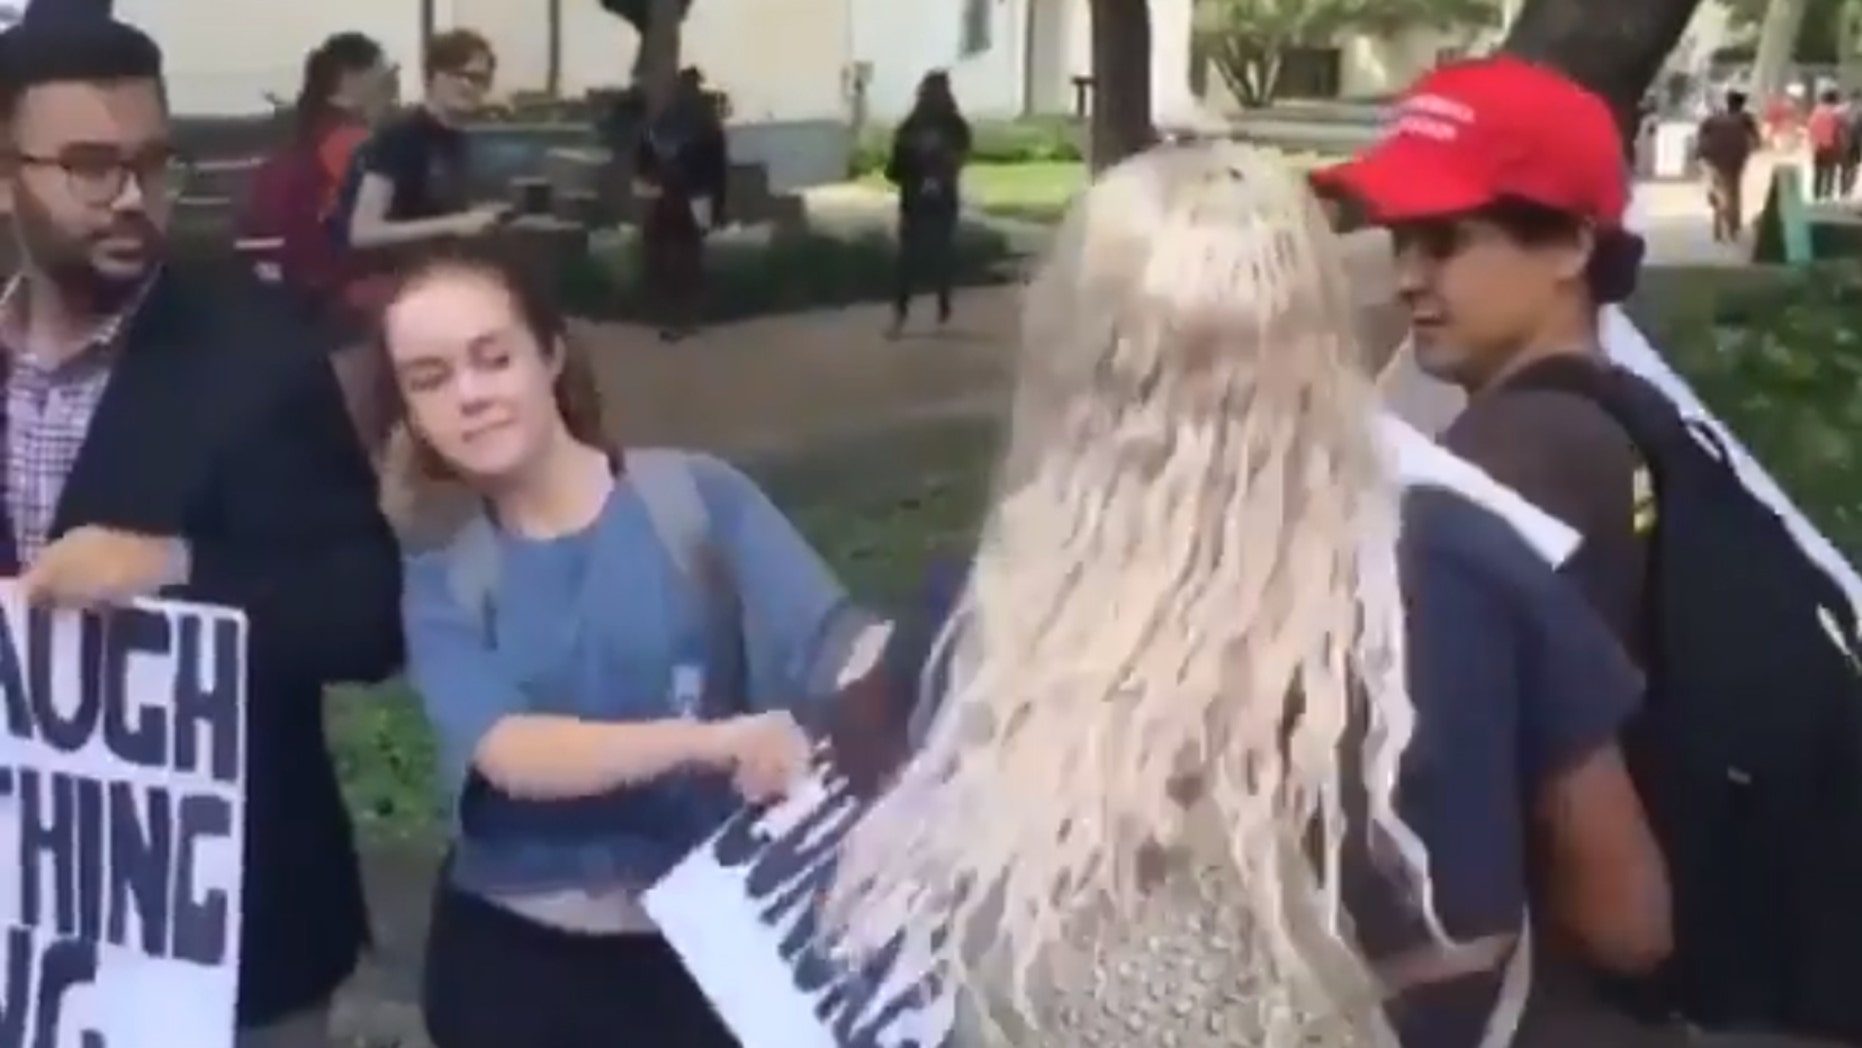 ‘Leftist mob’ rip up signs, hurl expletives at conservative students supporting Kavanaugh